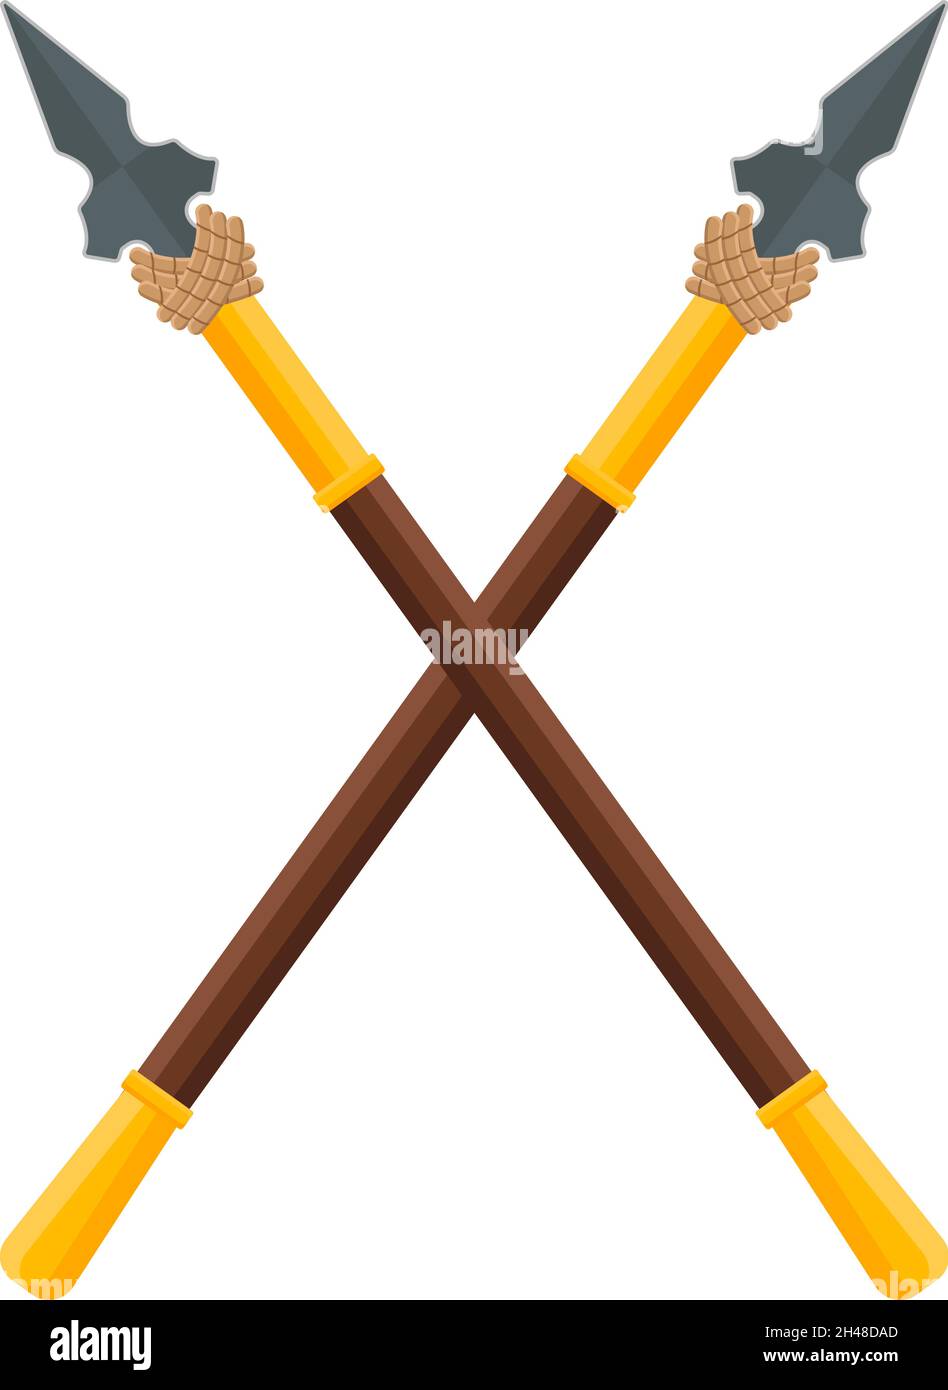 Spear weapon, illustration, vector on a white background. Stock Vector